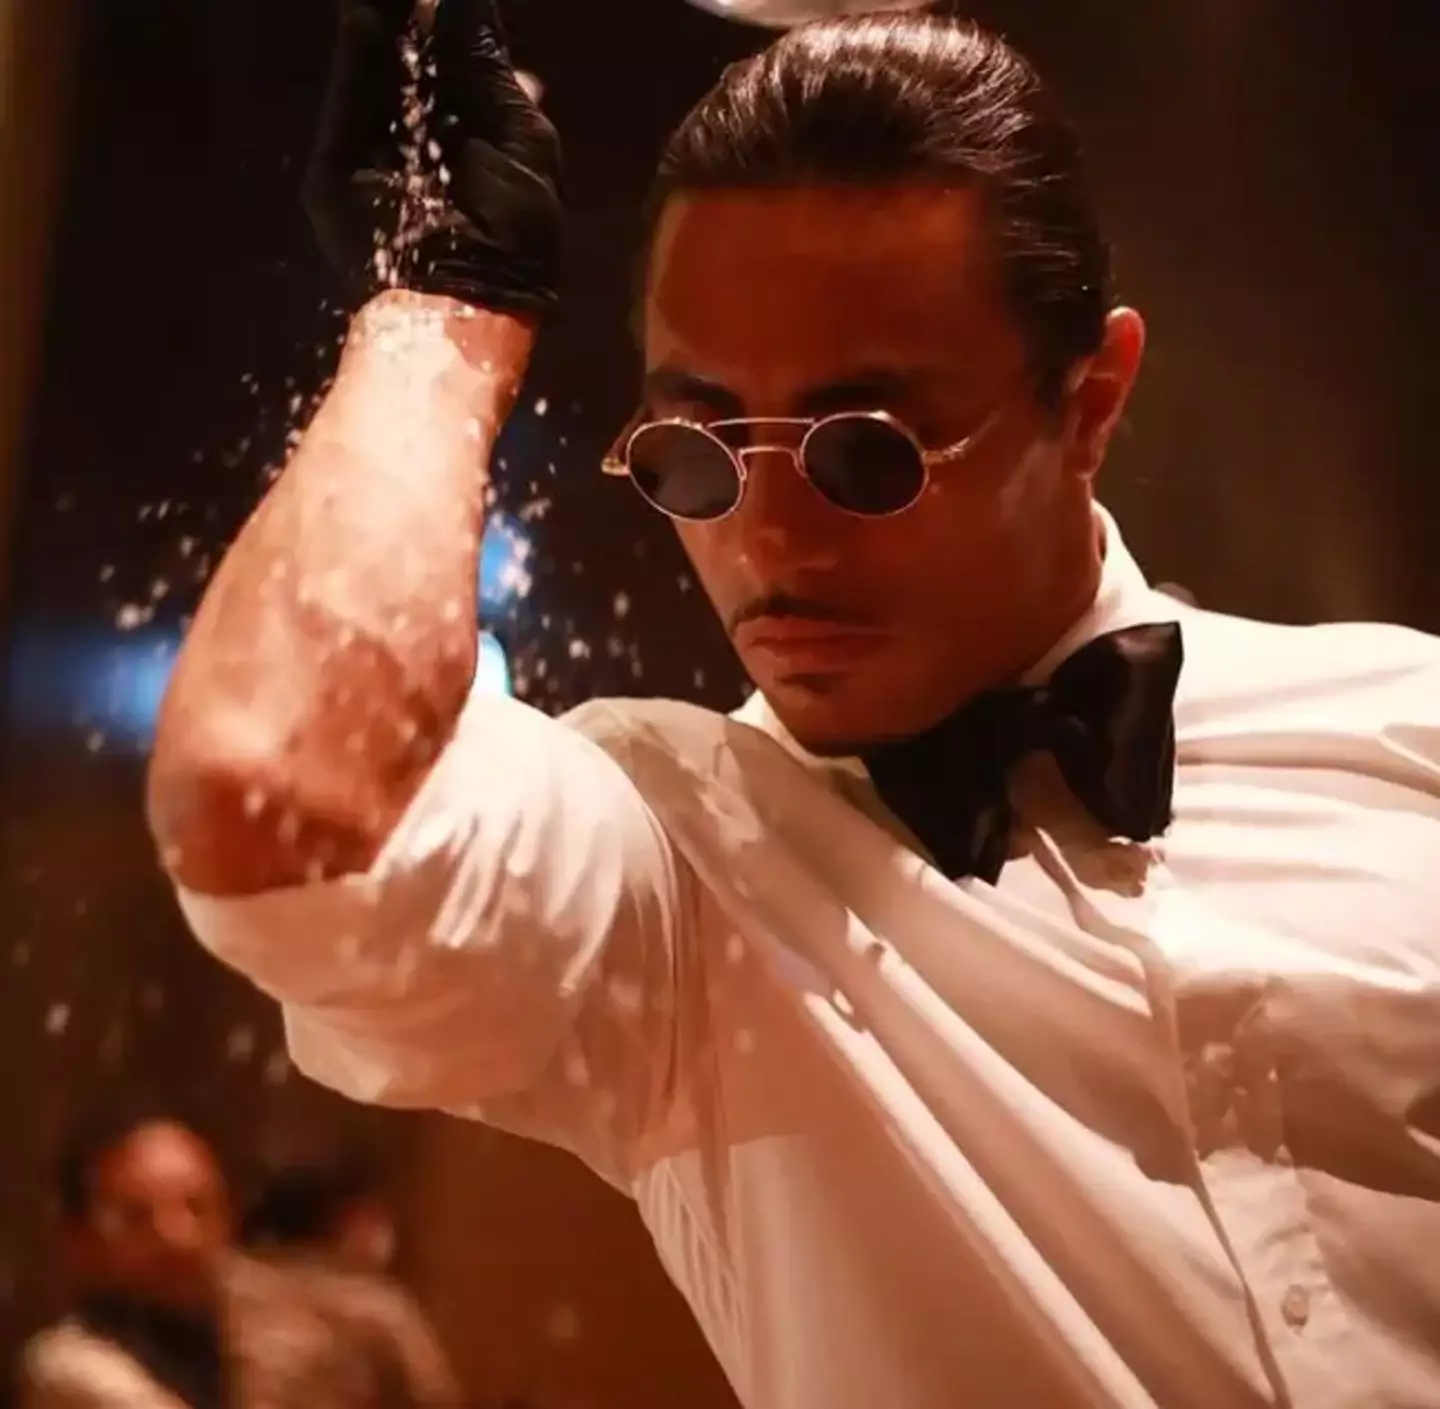 Salt Bae's come under fire for some of his steakhouse prices.